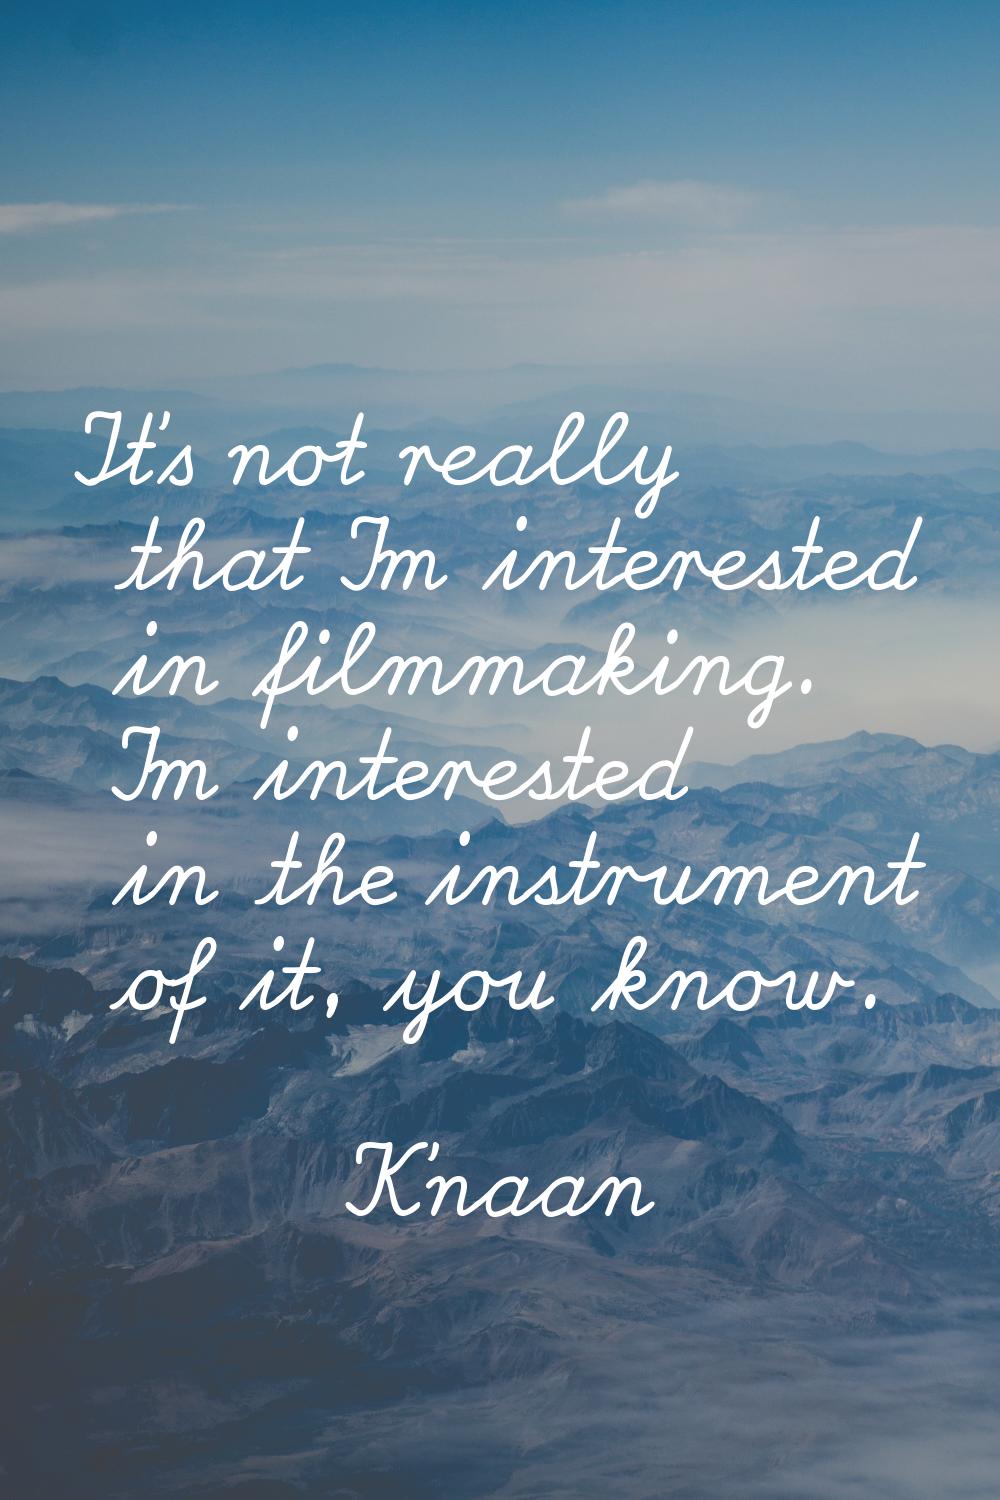 It's not really that I'm interested in filmmaking. I'm interested in the instrument of it, you know